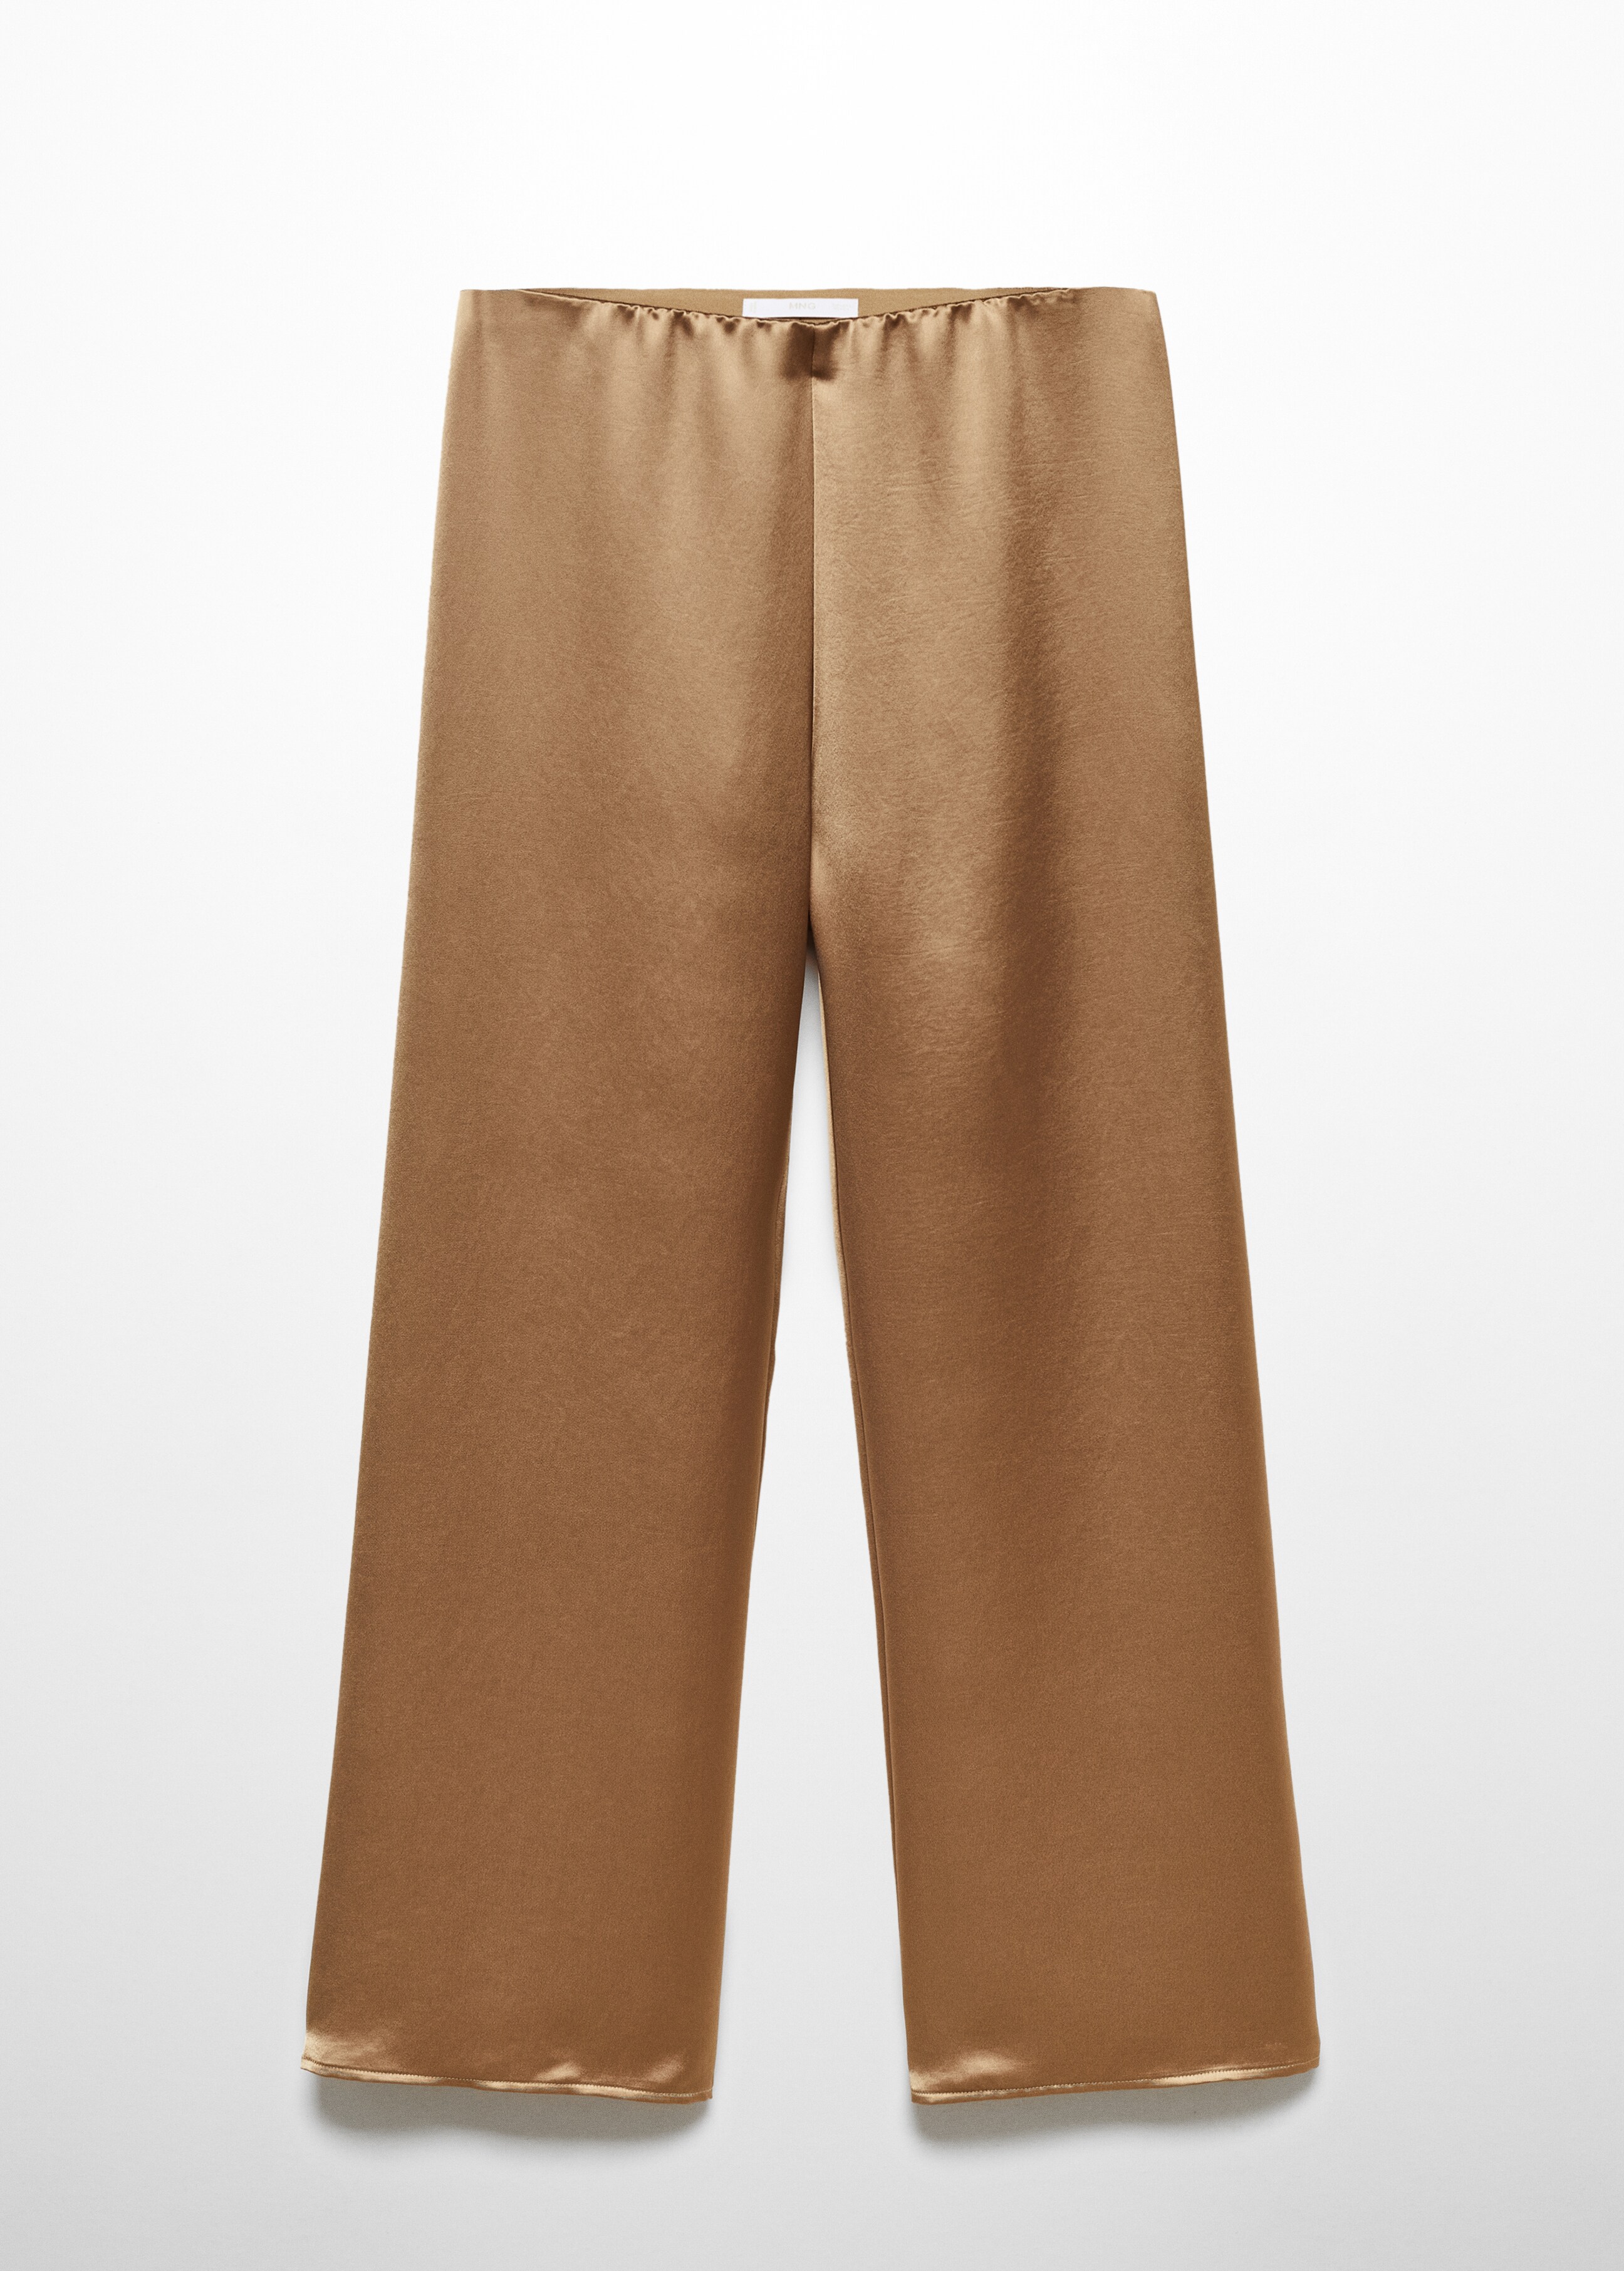 Satin-finish elastic waist trousers - Article without model